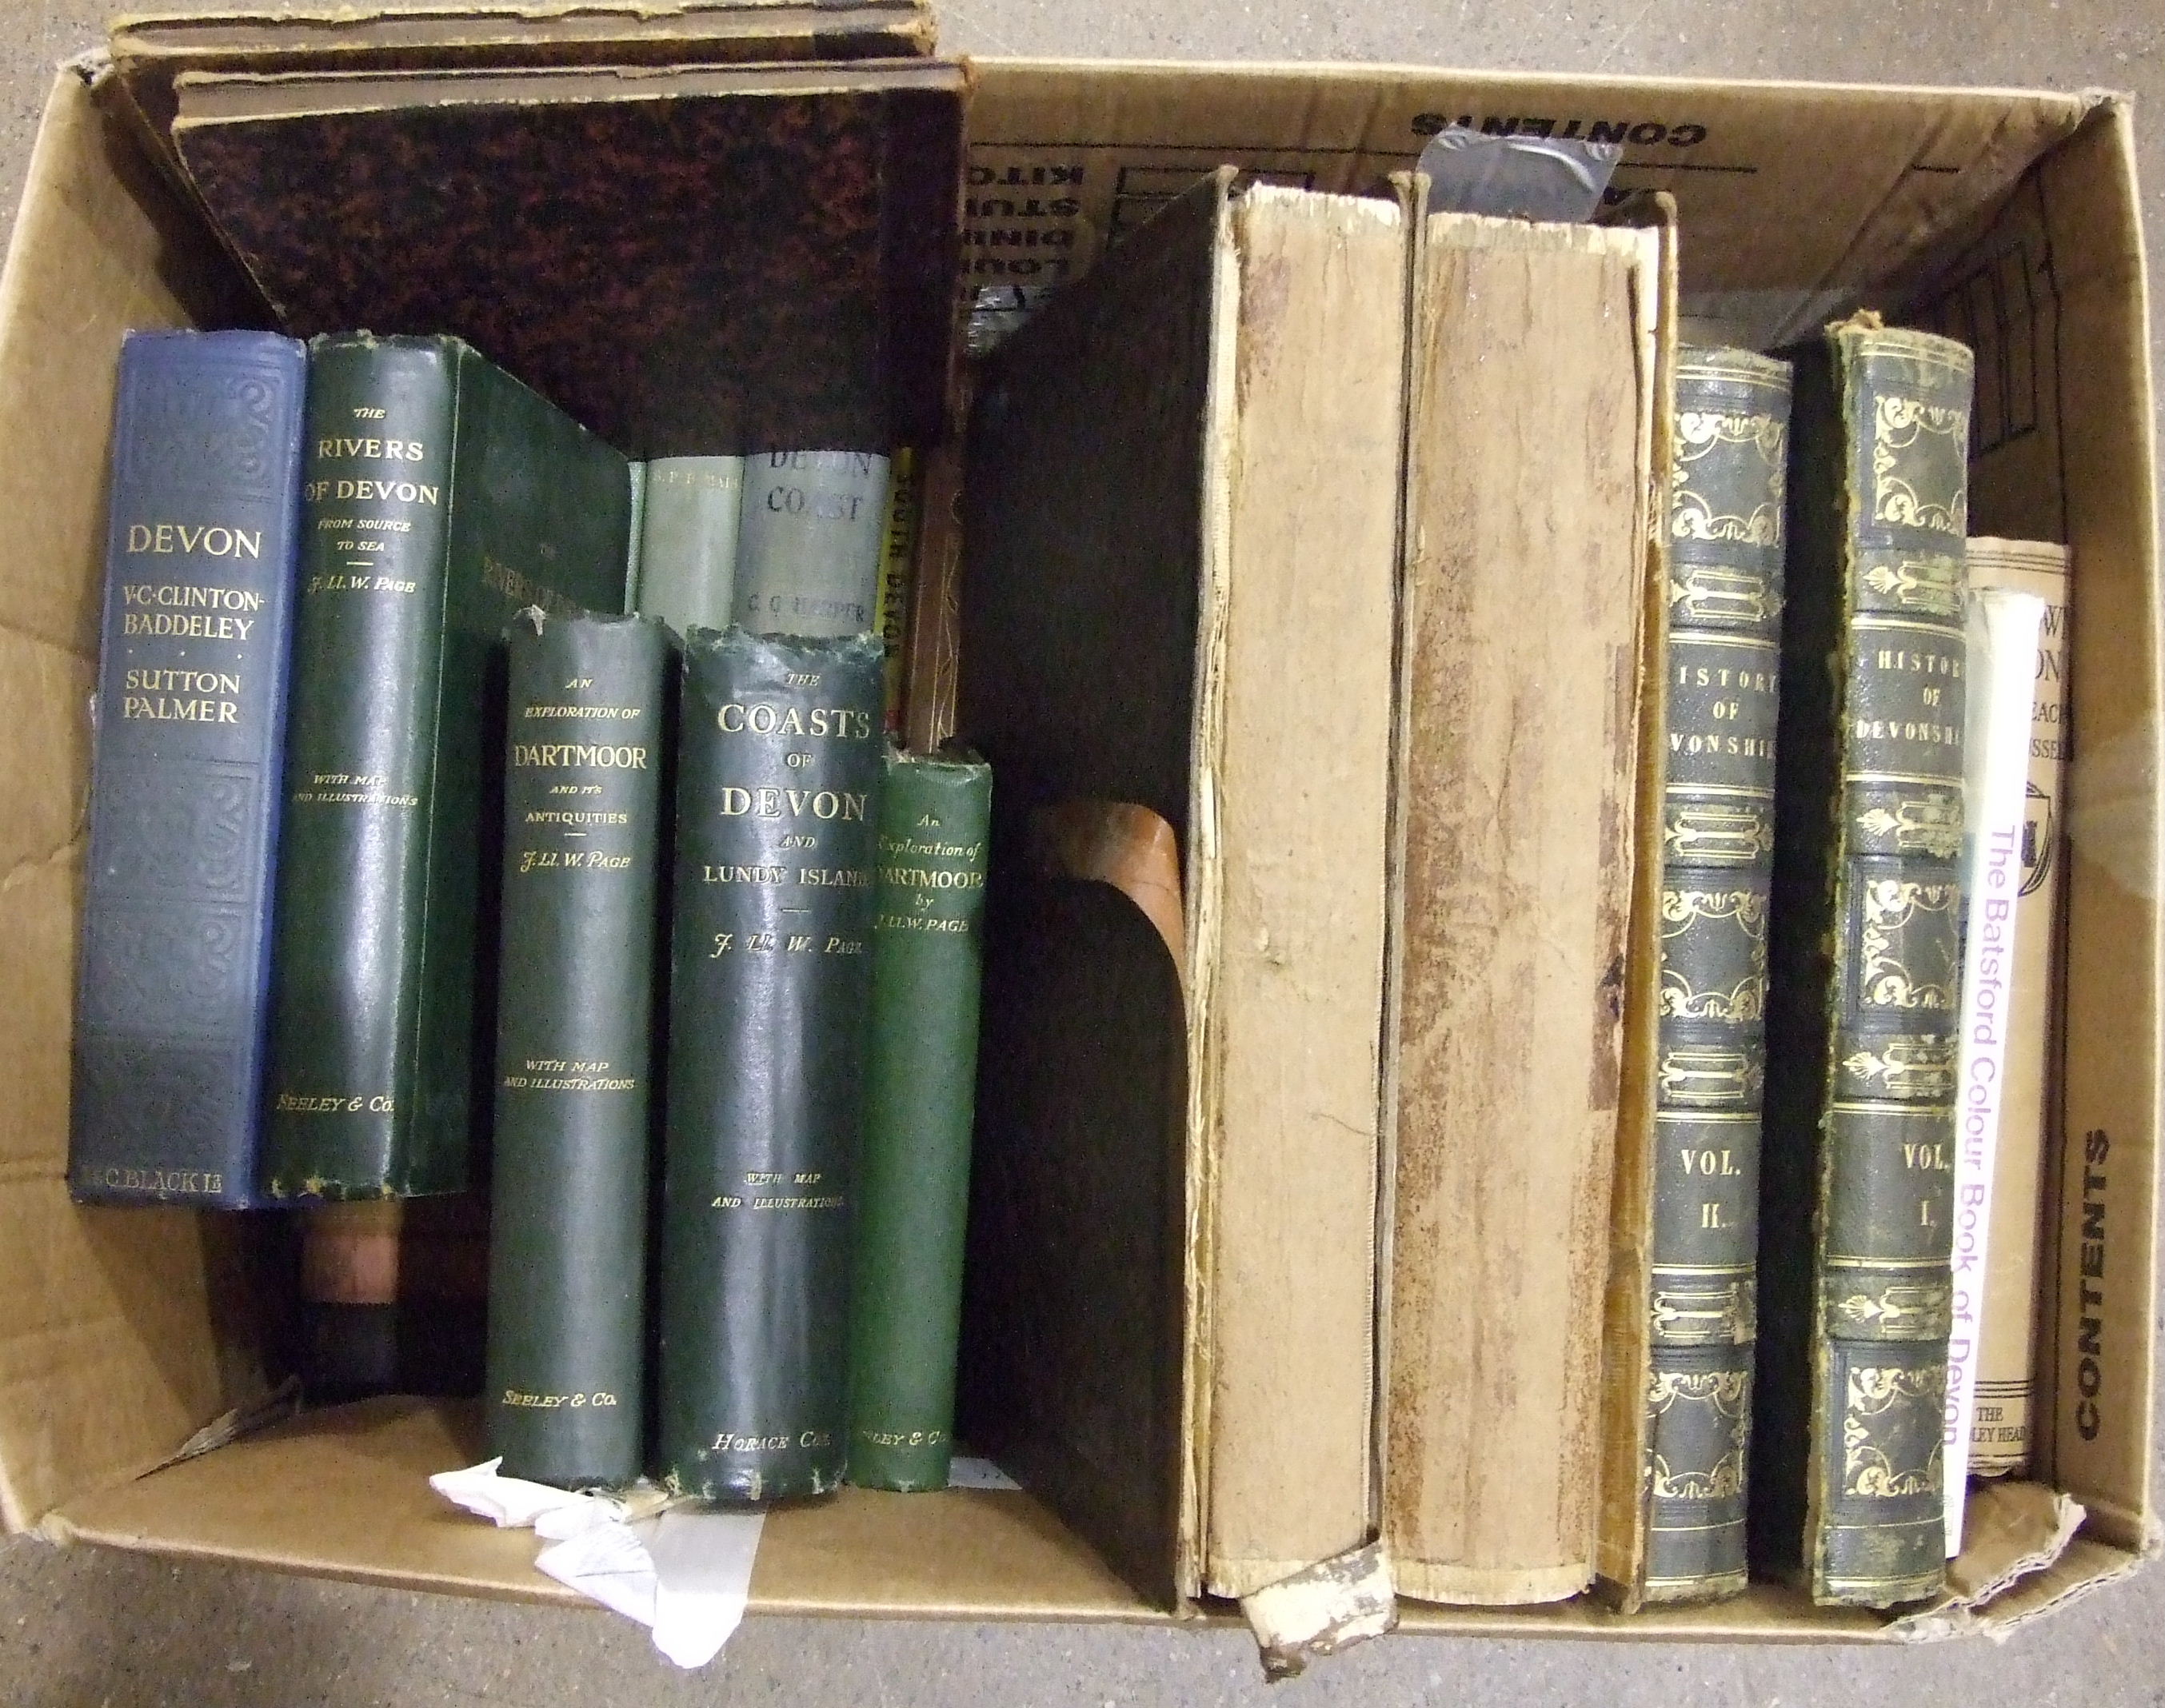 Cox (Rev Thomas), Magna Britannia, two Devonshire extracts, both with fldg maps by Robert Morcen,